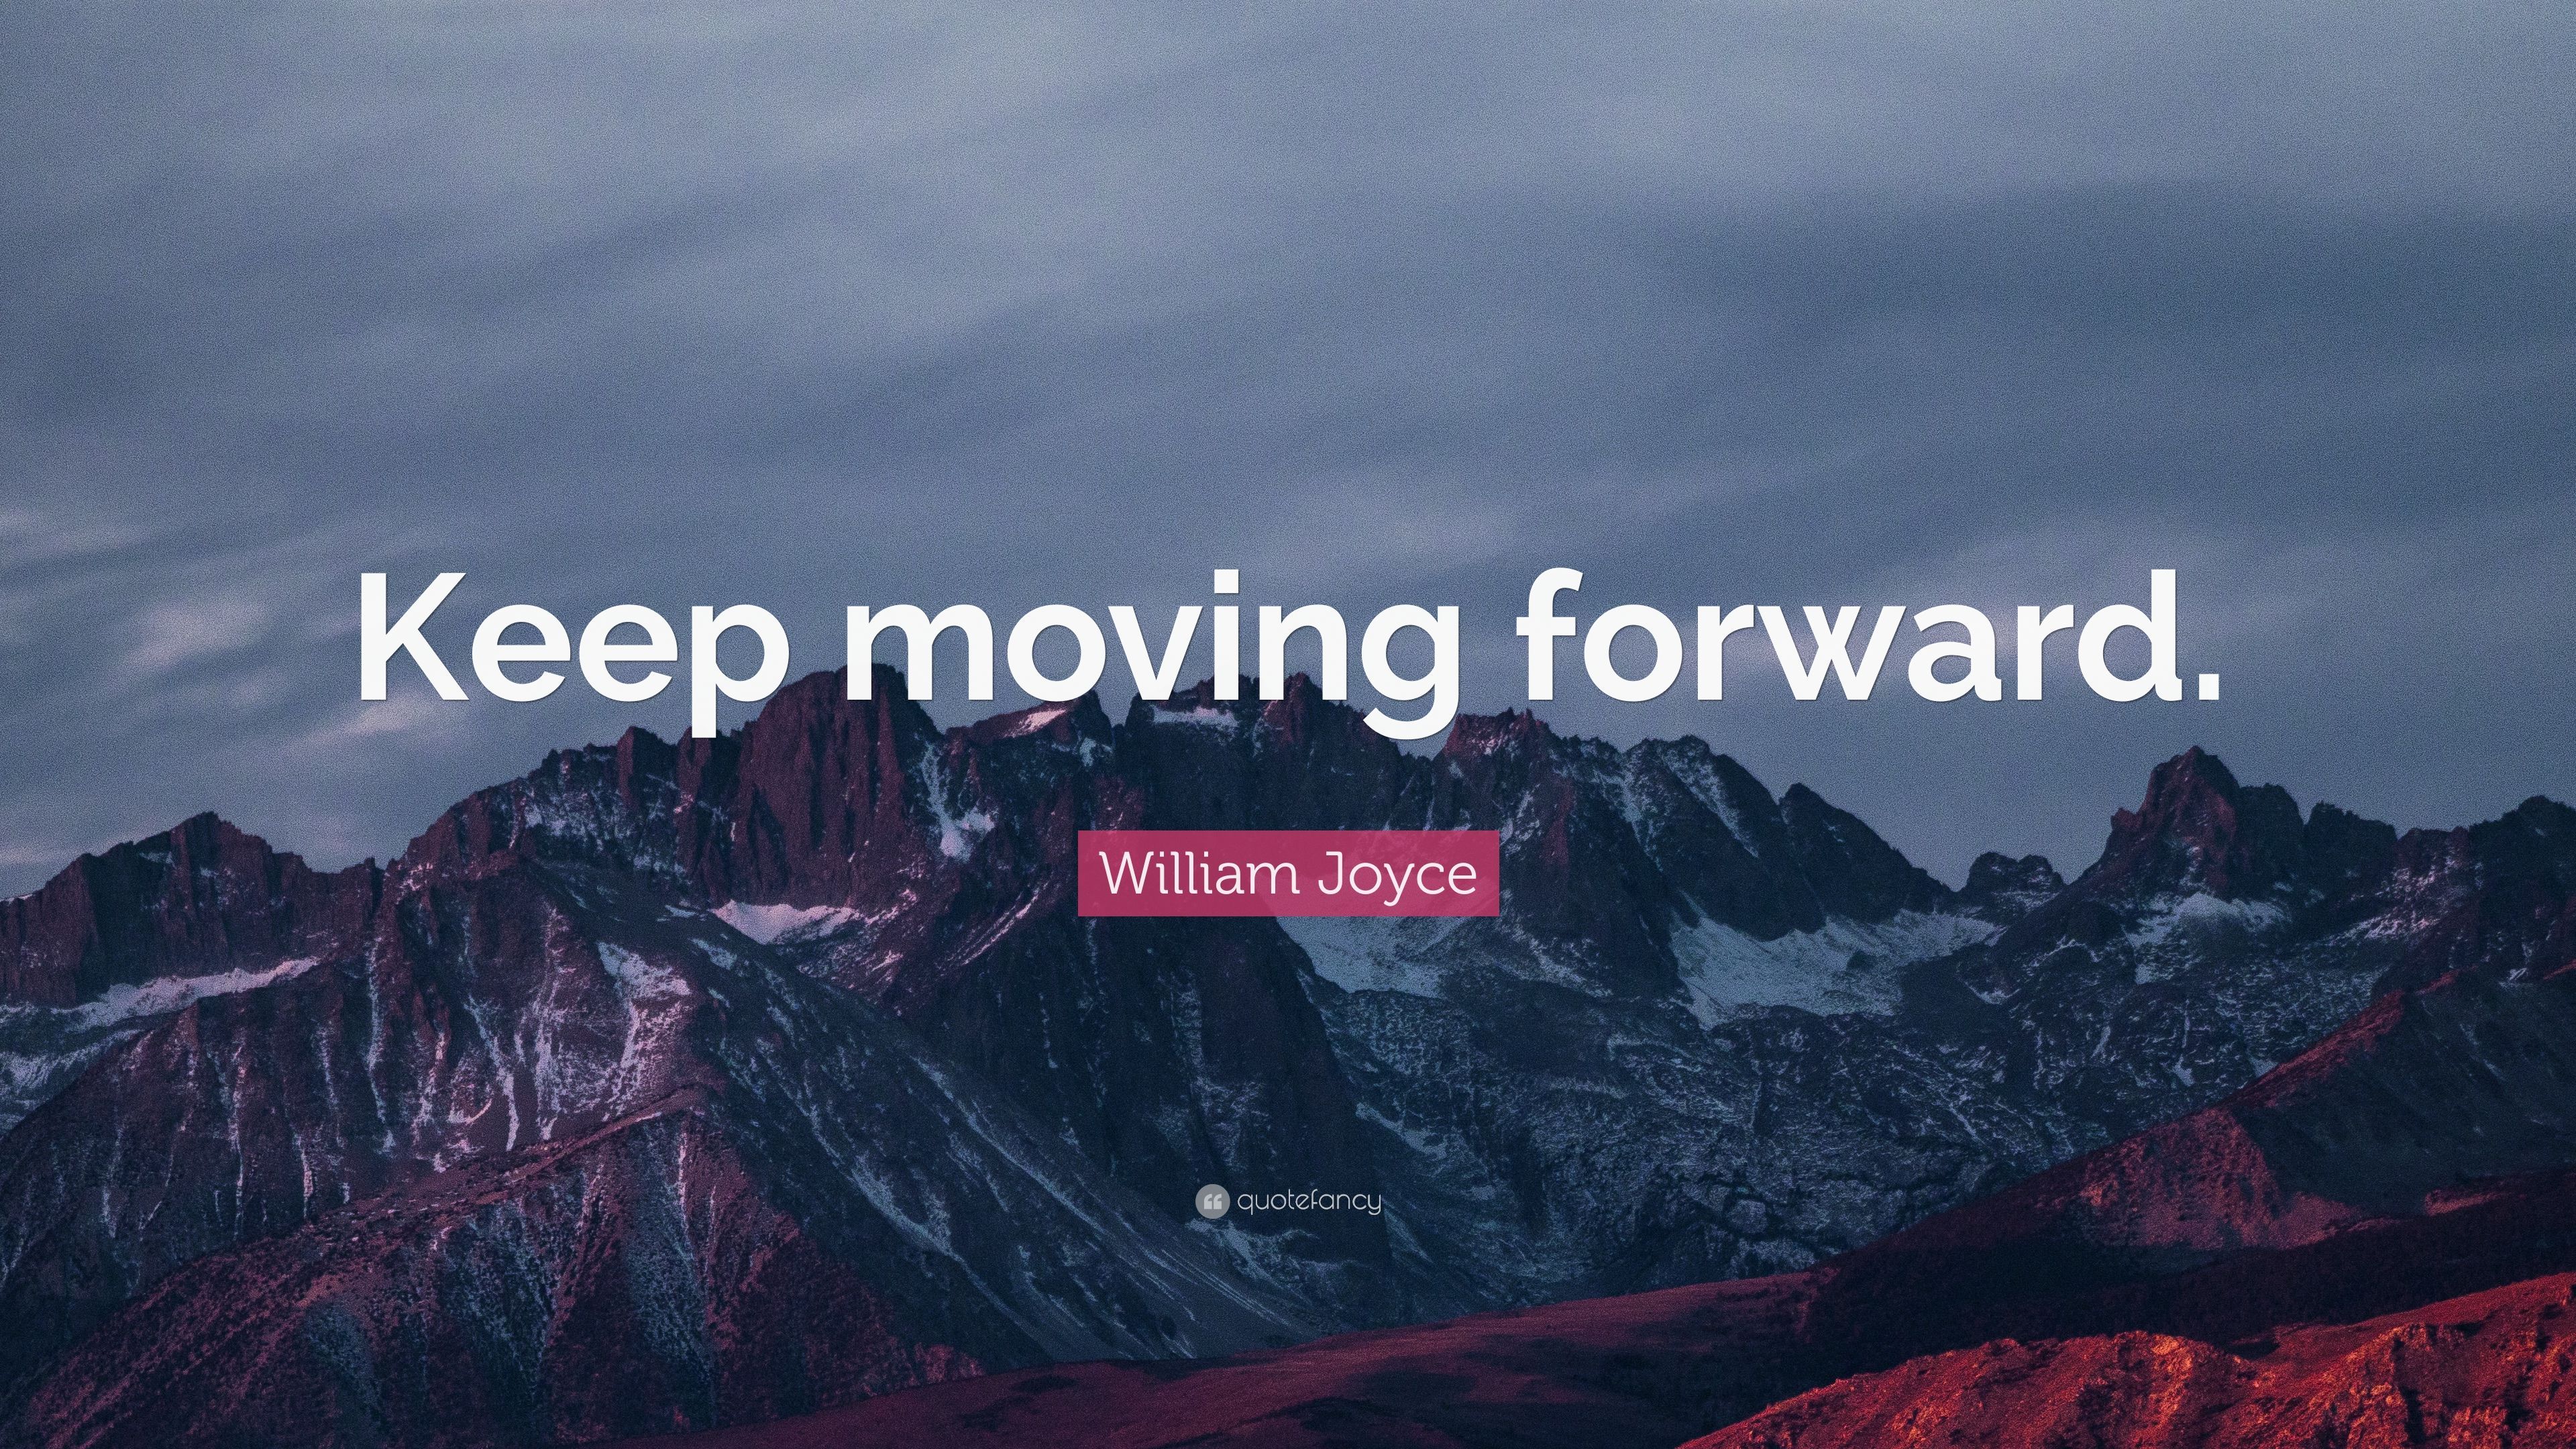 William Joyce Quote: “Keep moving forward.” (7 wallpaper)